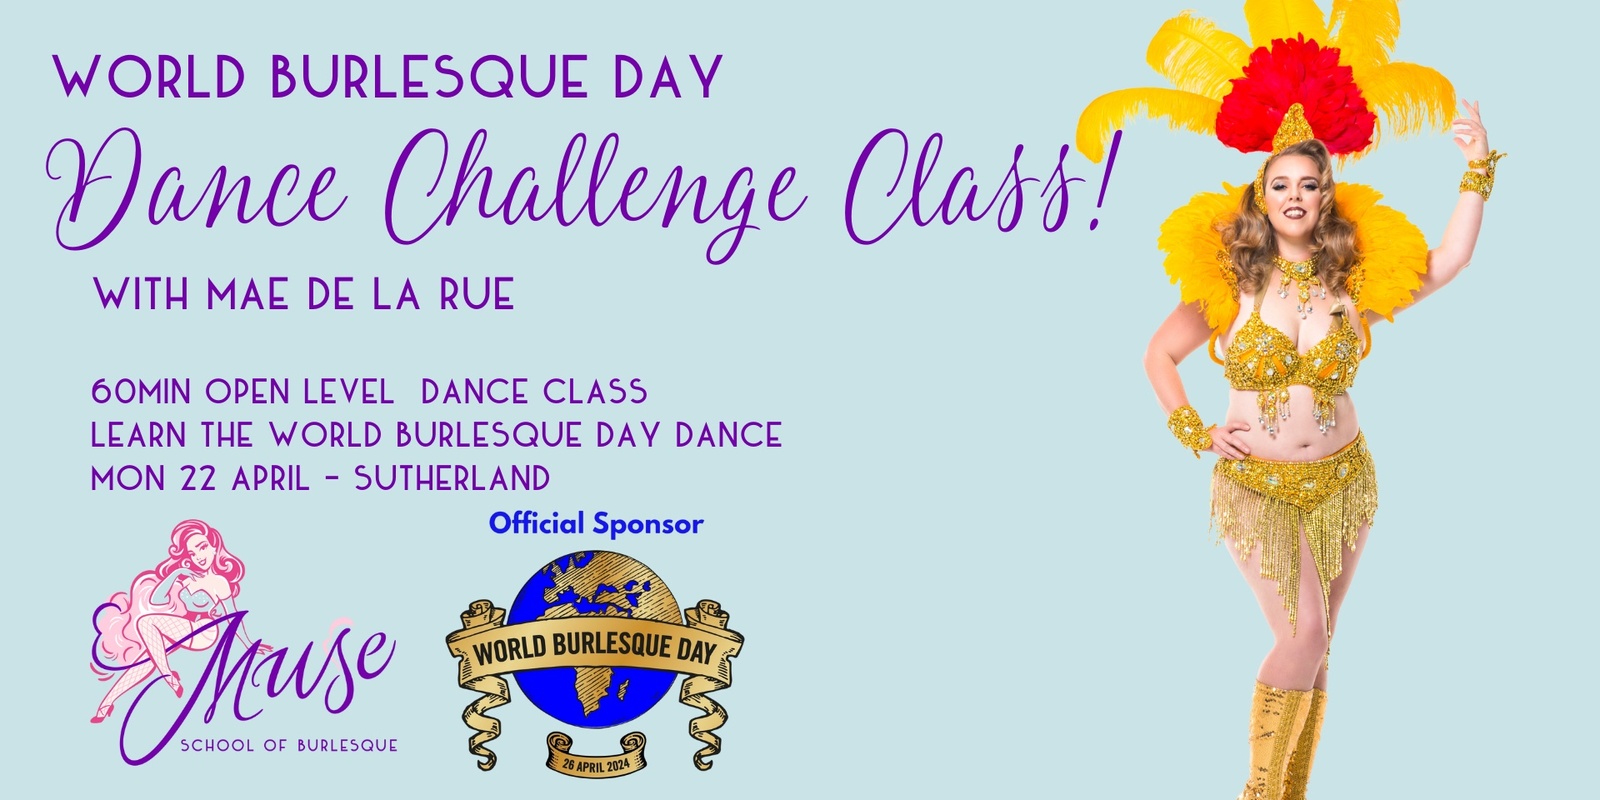 Banner image for Sutherland - World Burlesque Day Dance Challenge Class